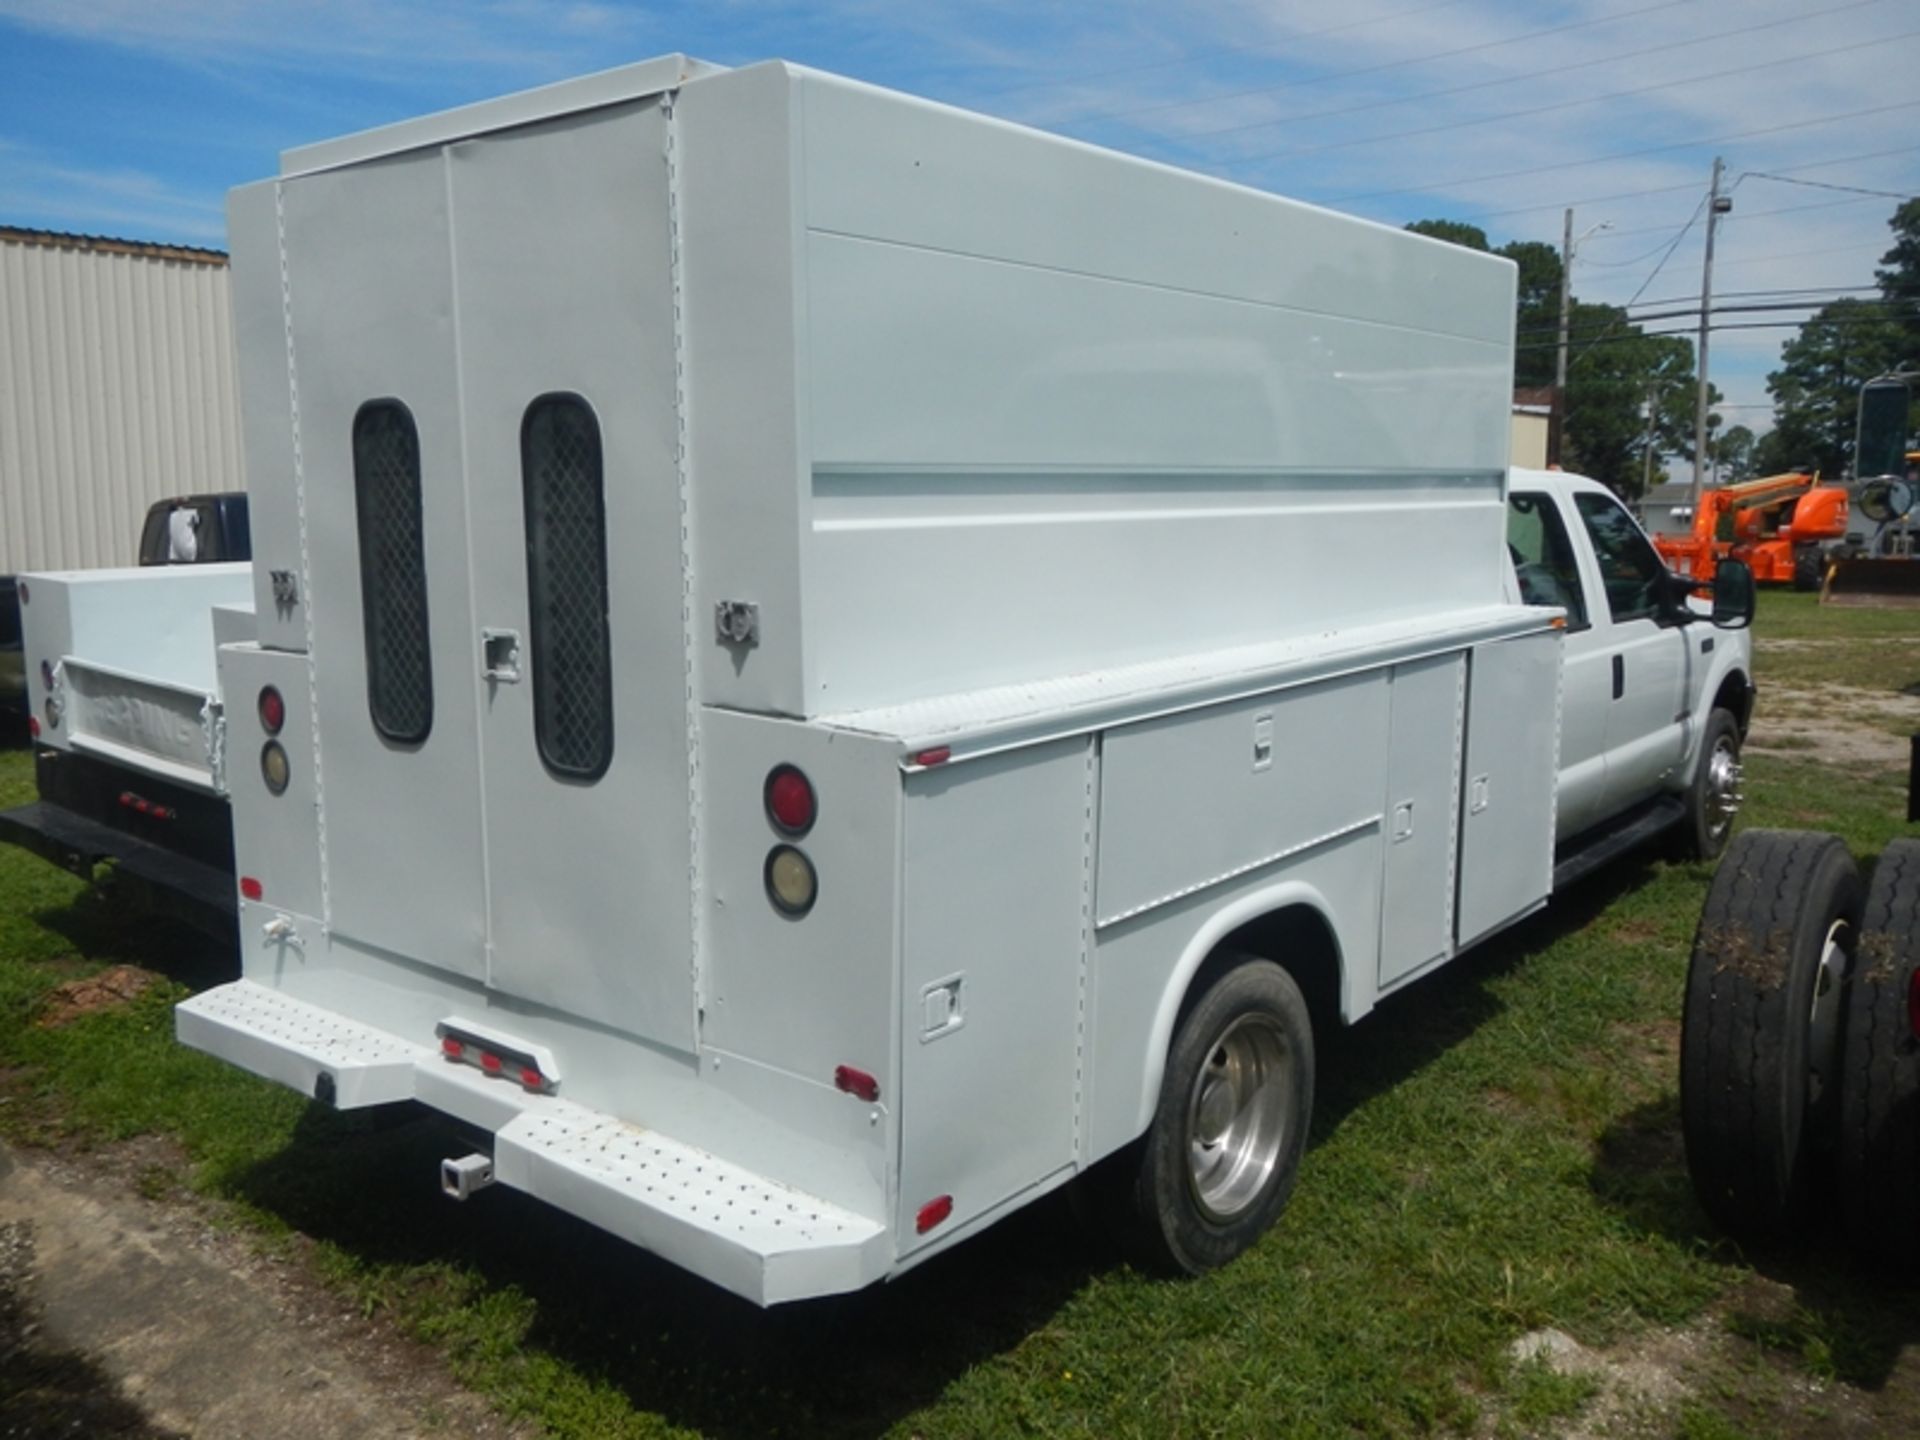 2003 FORD F550 crew cab, covered utility body, diesel (rebuilt 25K ago) - 266,663 miles - 1FDAW56P33 - Image 3 of 7